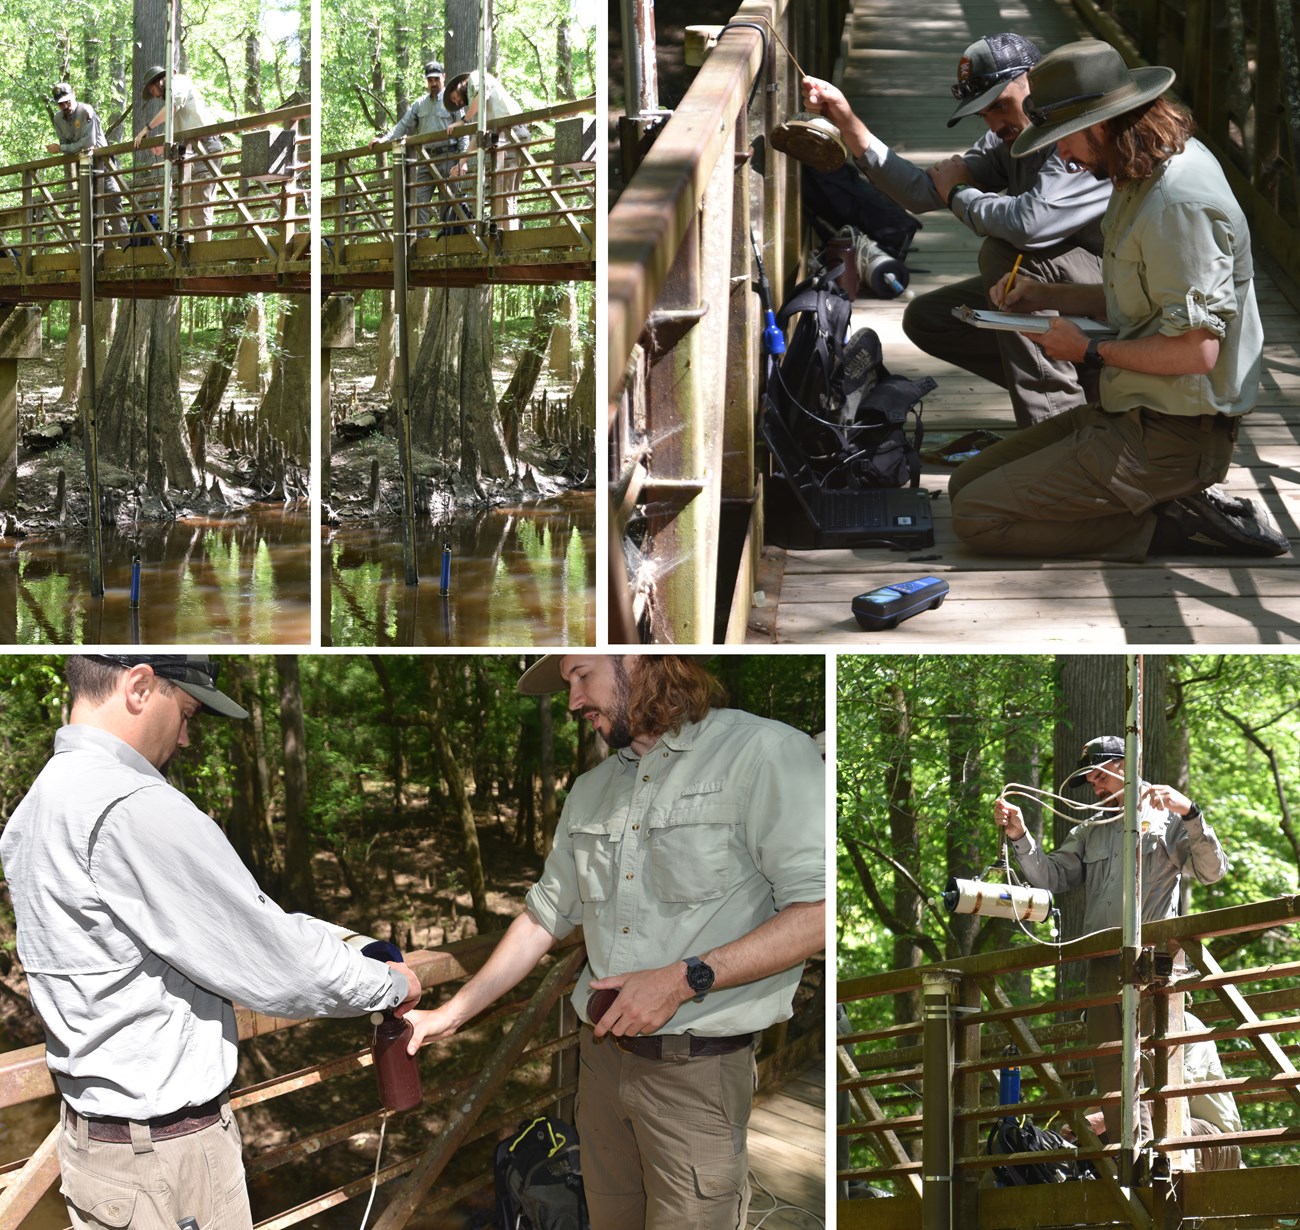 Various photos showing two men collect water samples off a bridge